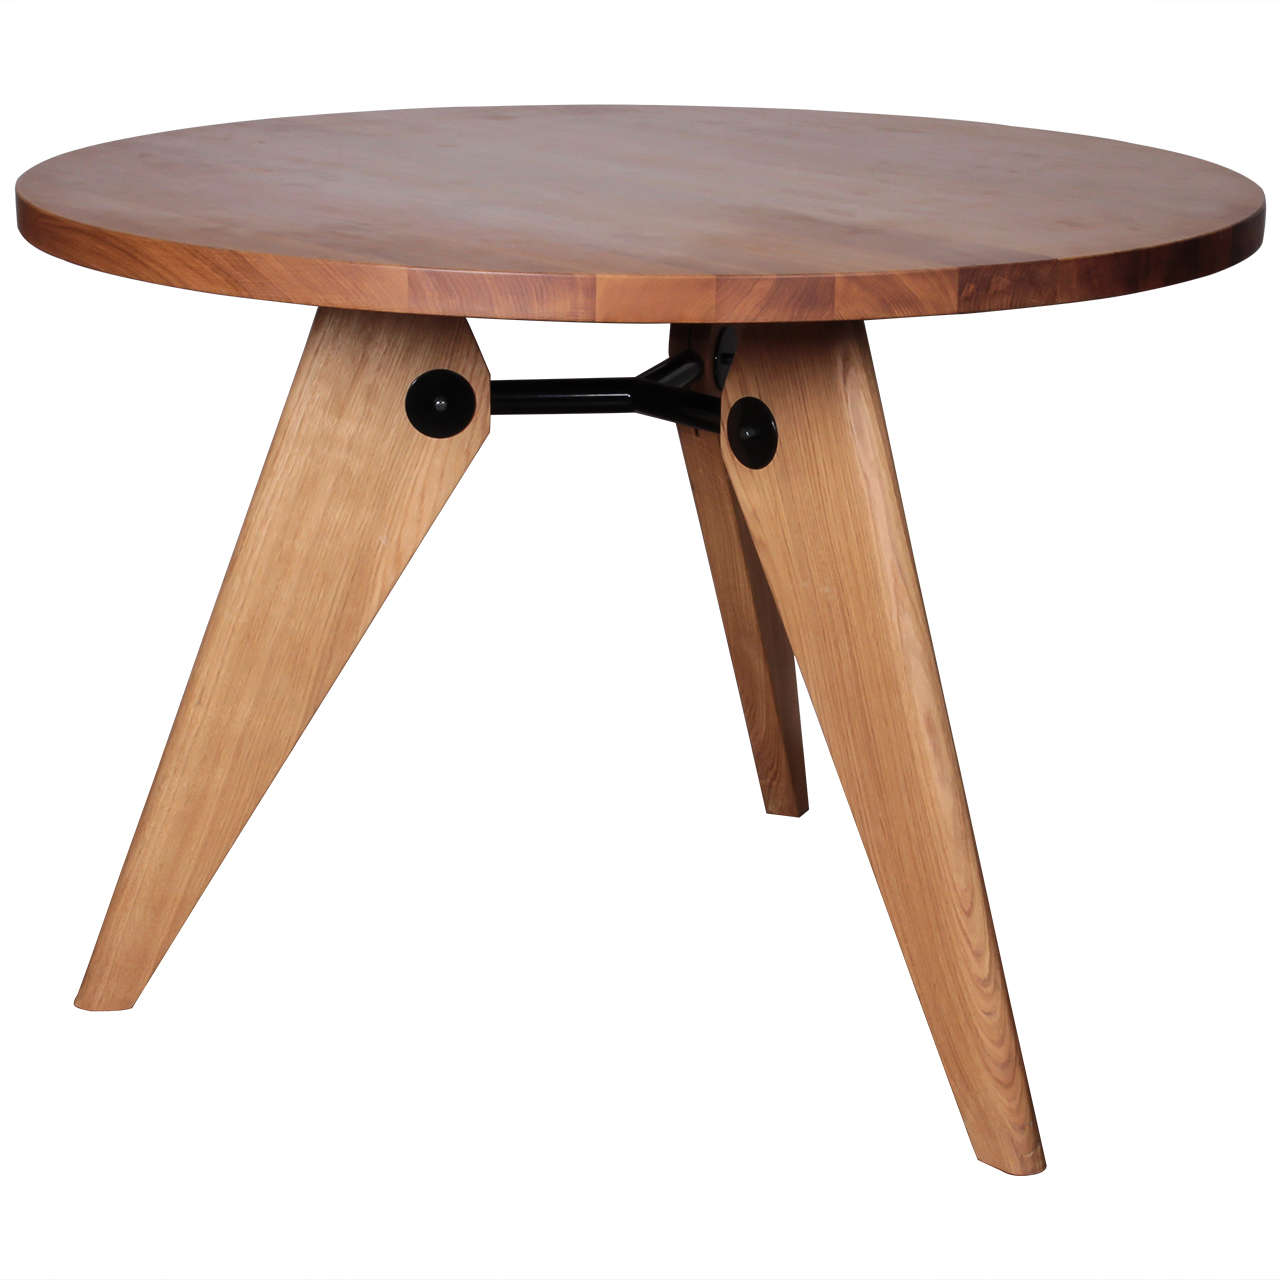 Jean Prouve Gueridon Dining Table Produced by Vitra